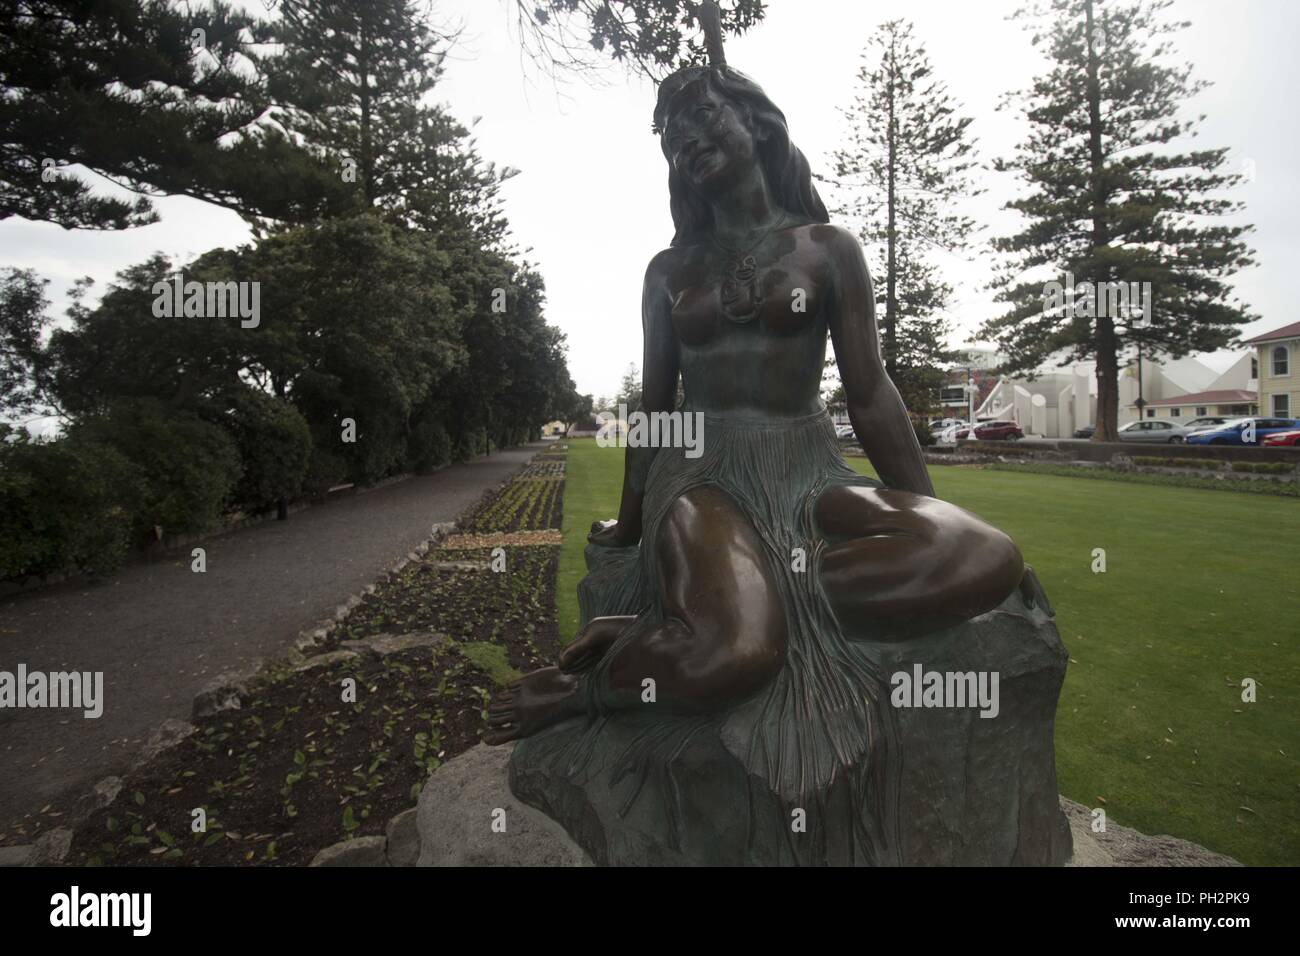 Close-up of the statue Pania of the Reef, depicting a Maori mythological mermaid figure, in Marine Parade, Napier, New Zealand, November 29, 2017. () Stock Photo